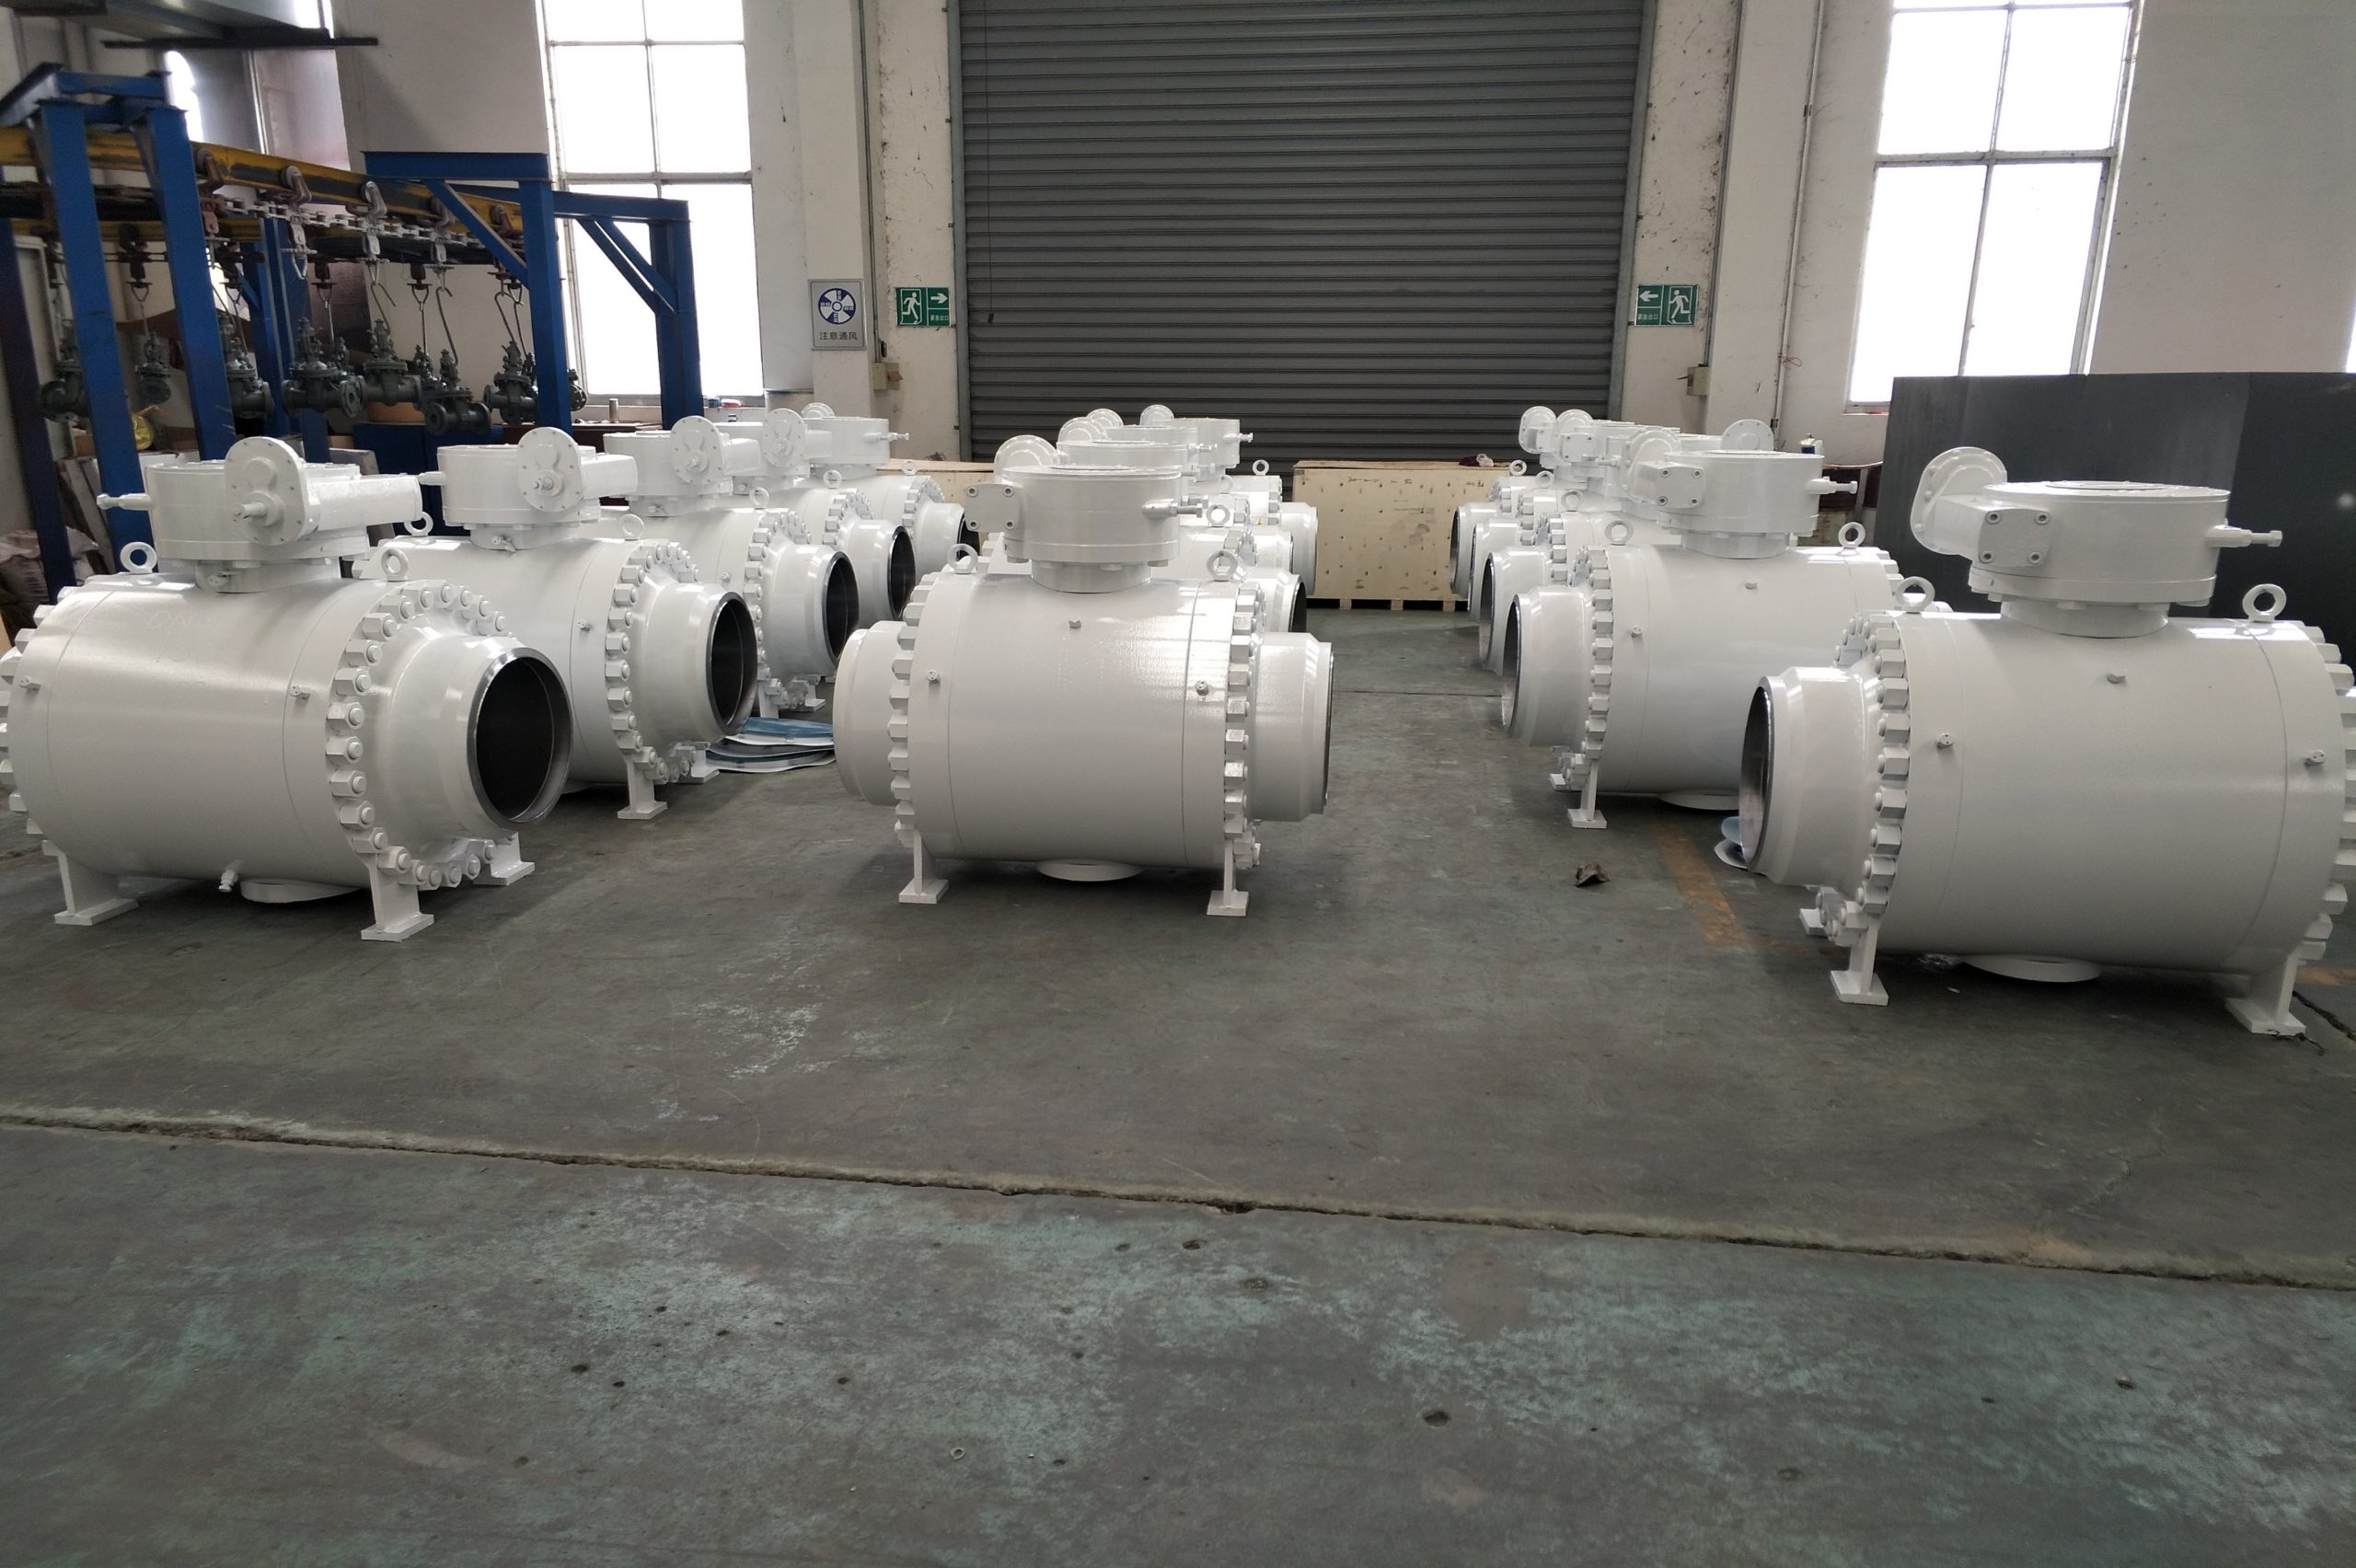 White color industrial valves ready for dispatch by butterfly valve manufacturers in Indonesia